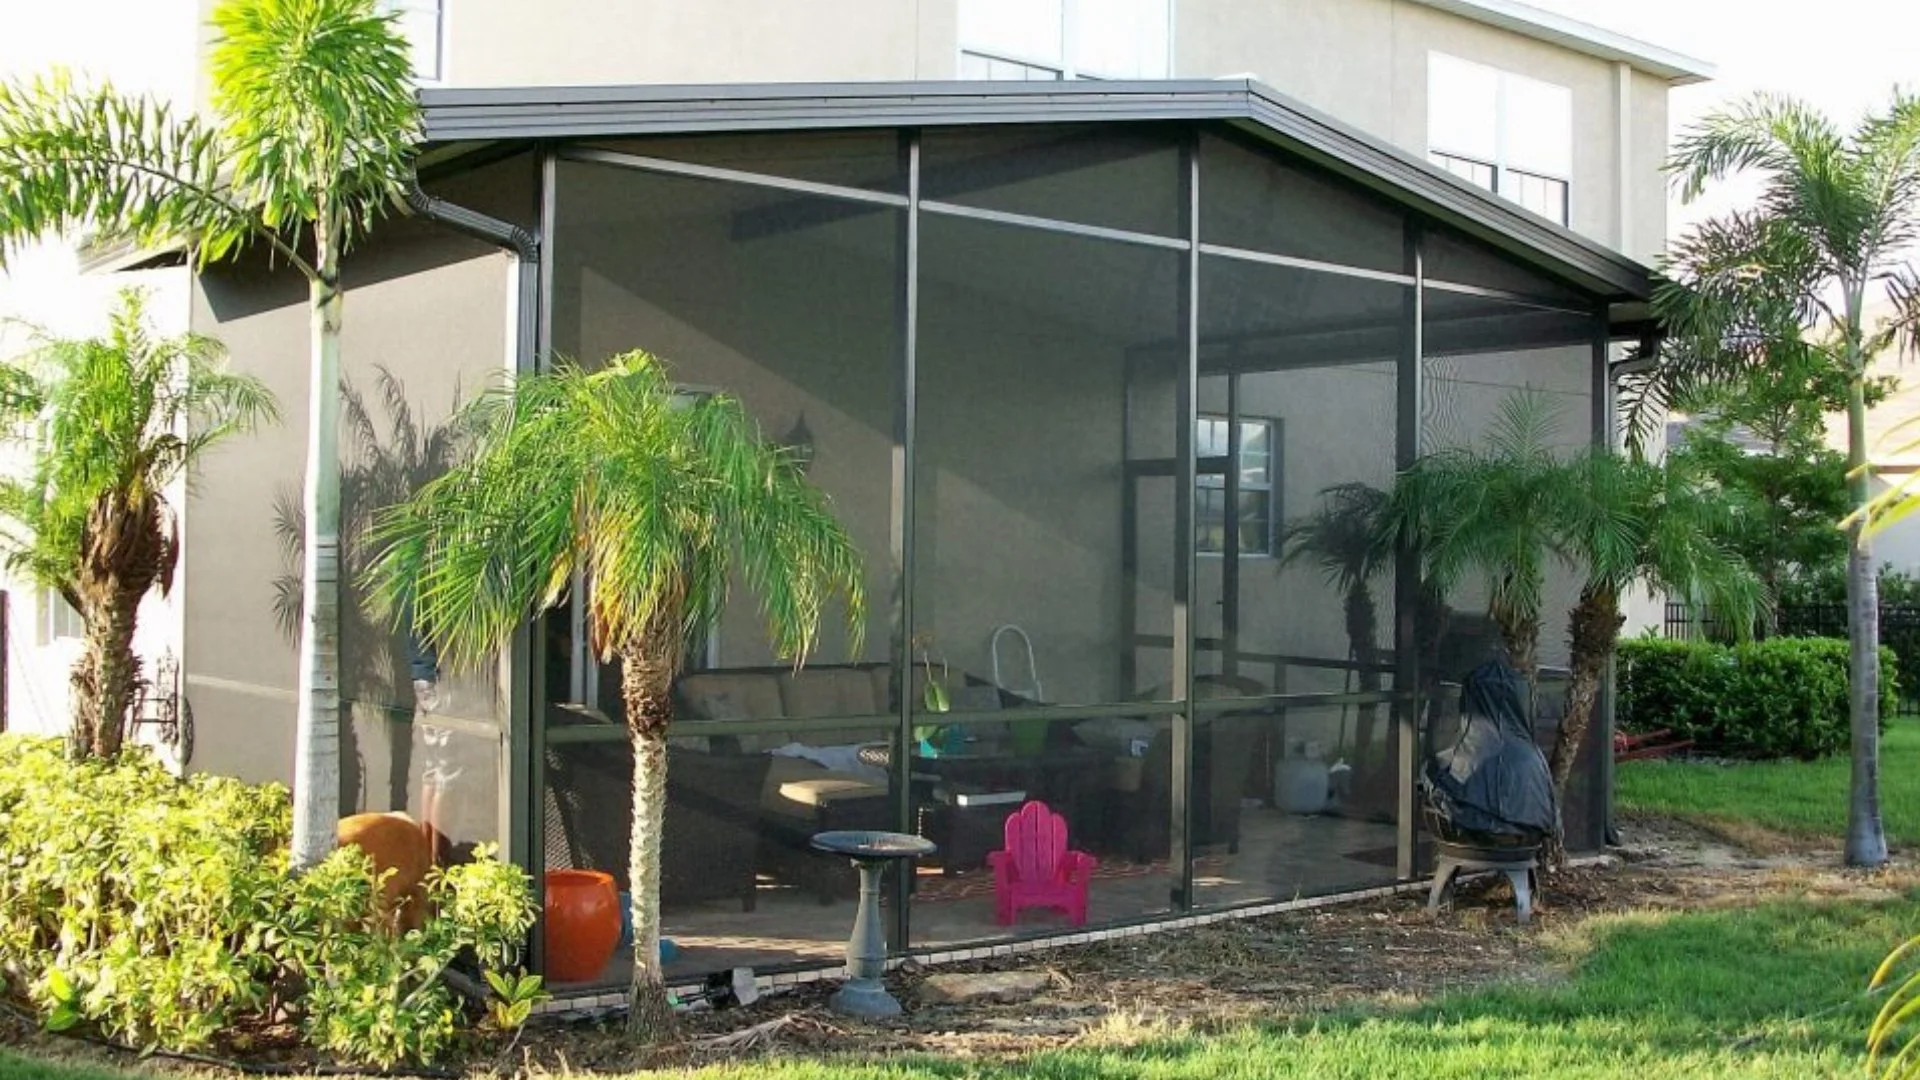 Hiring Pros to Install a Screen Room? Make Sure They Offer Warranties!